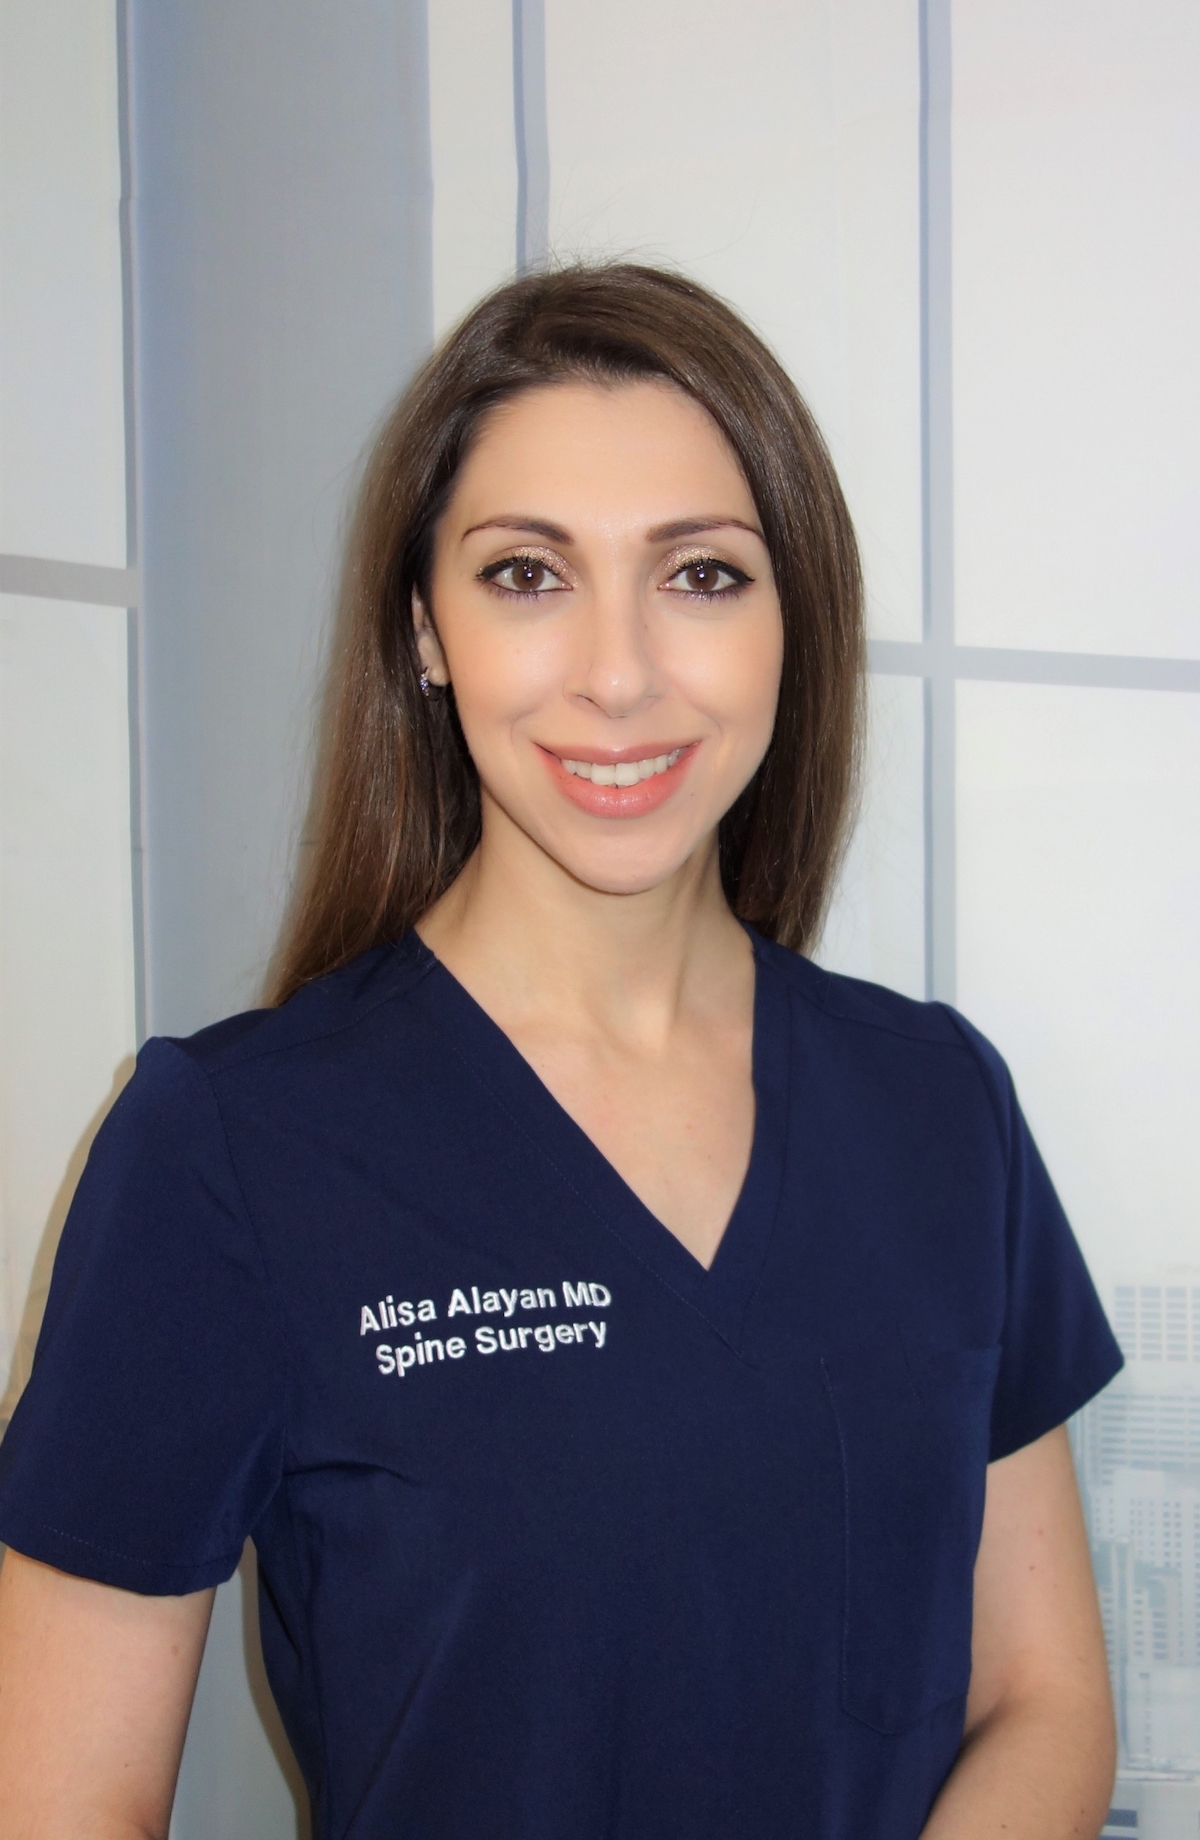 About | Dr. Alisa Alayan